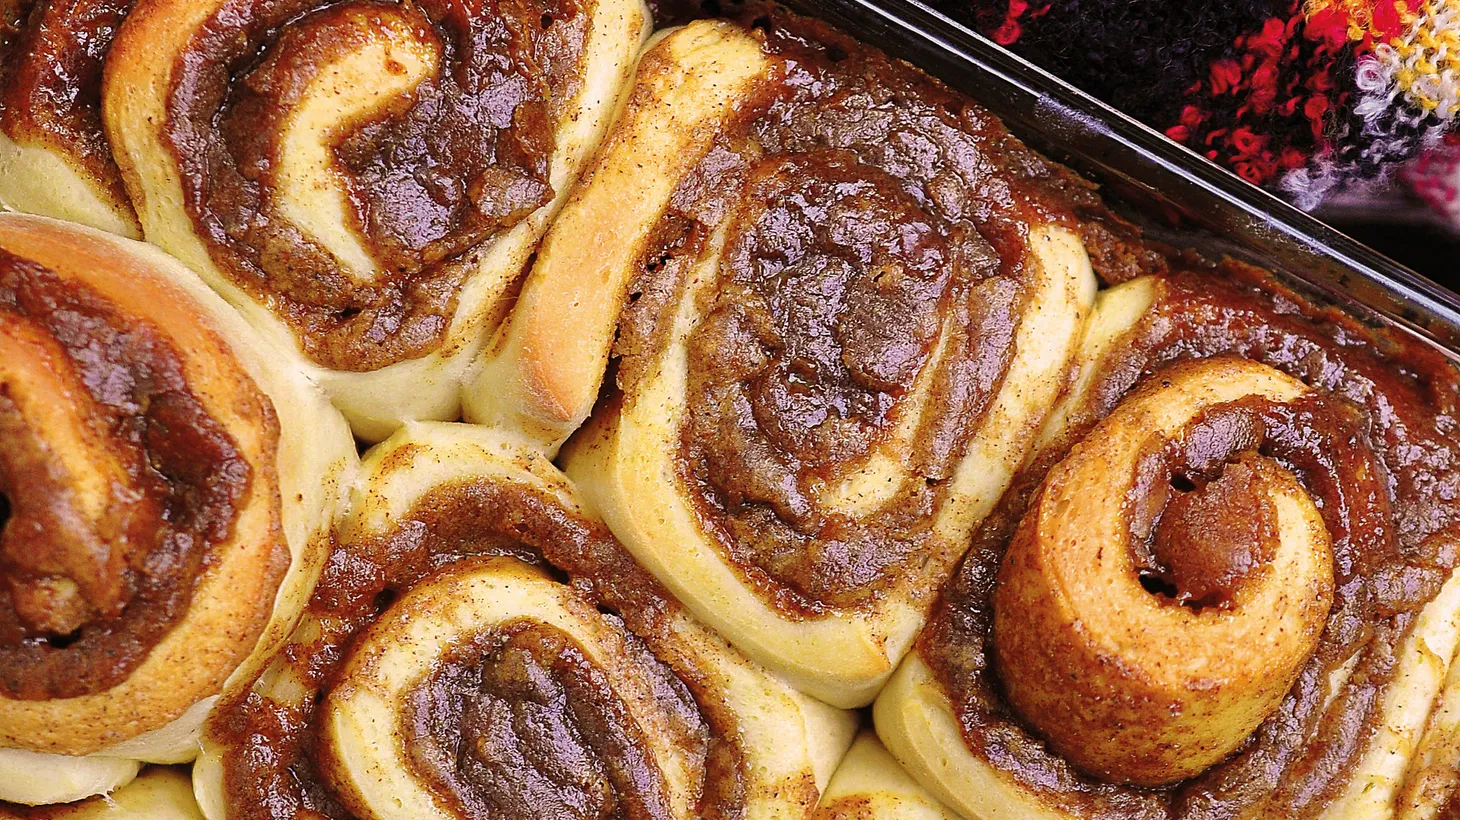 A self-proclaimed “cinnamon roll fanatic,” Leanne Brown turns to baking as self-care.